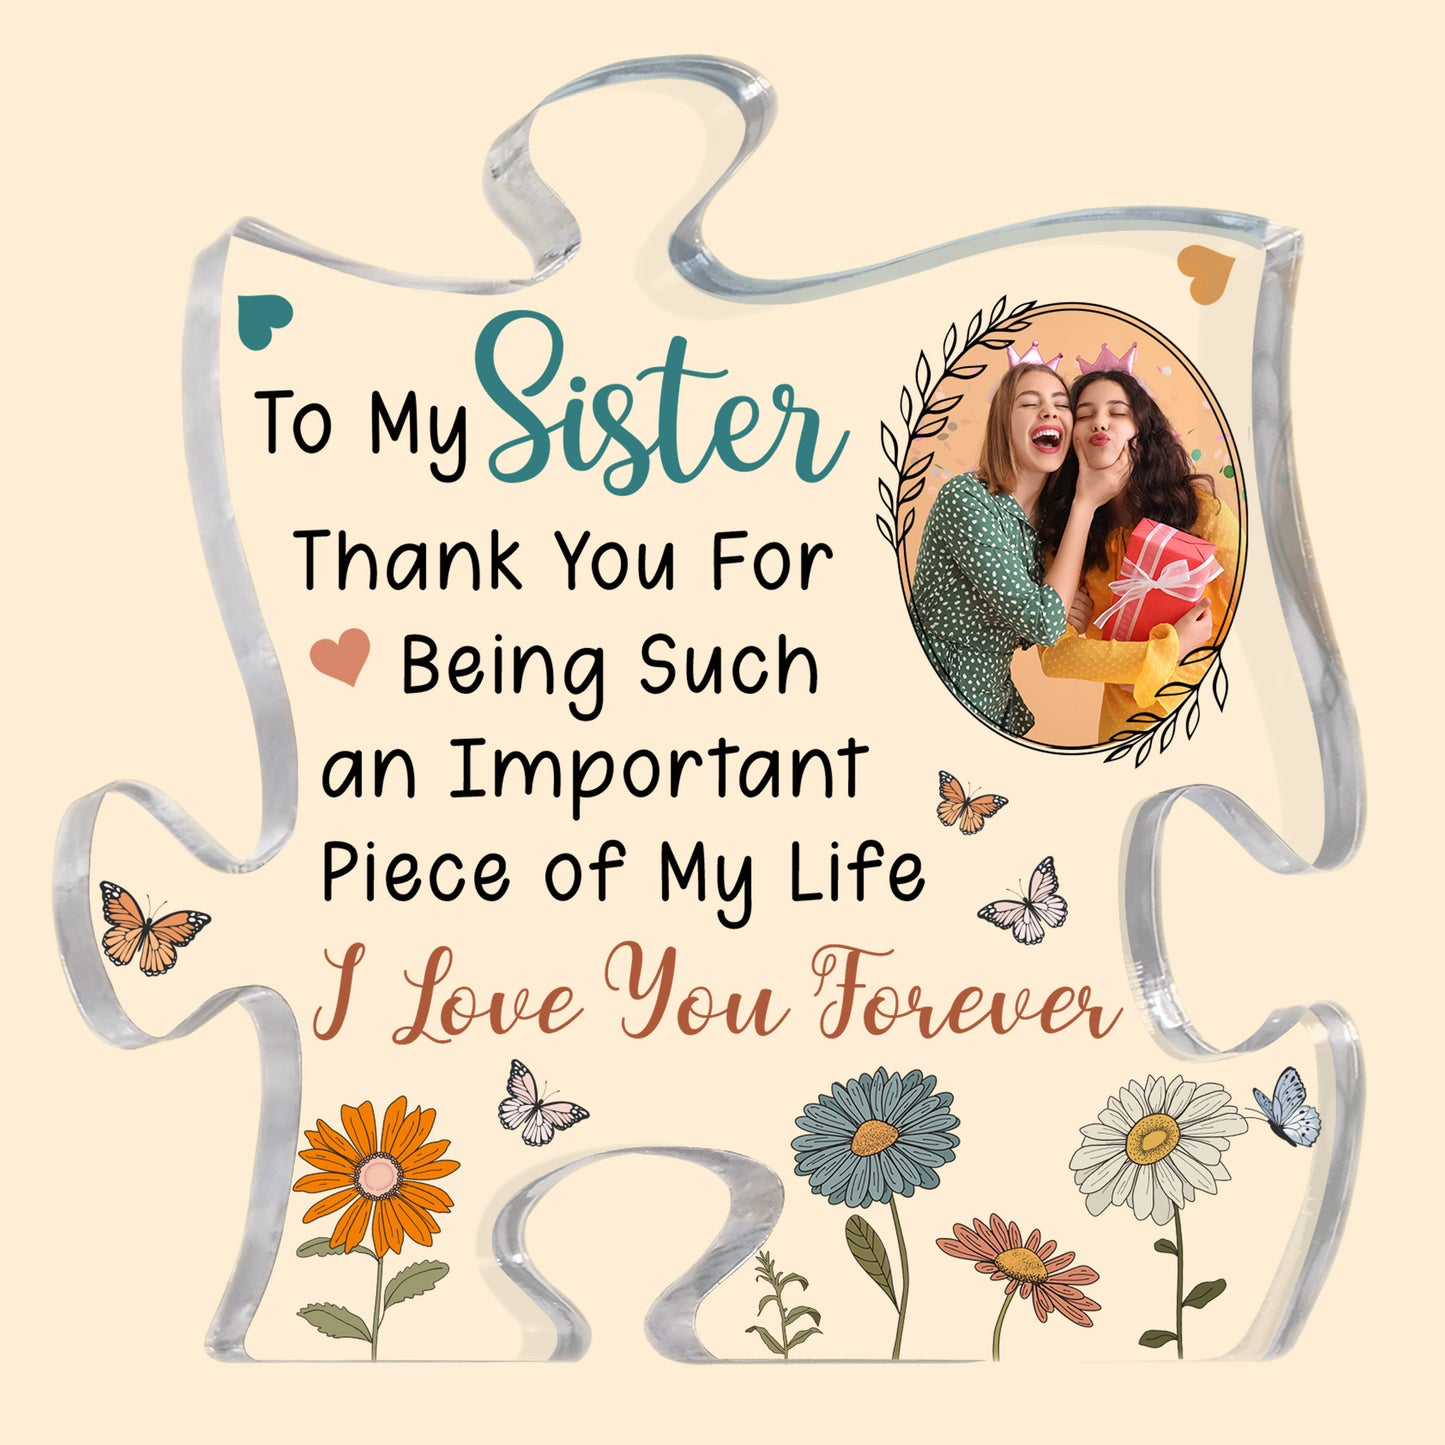 Thank You For An Important Piece Of My Life Sisters Friends - Personalized Acrylic Photo Plaque